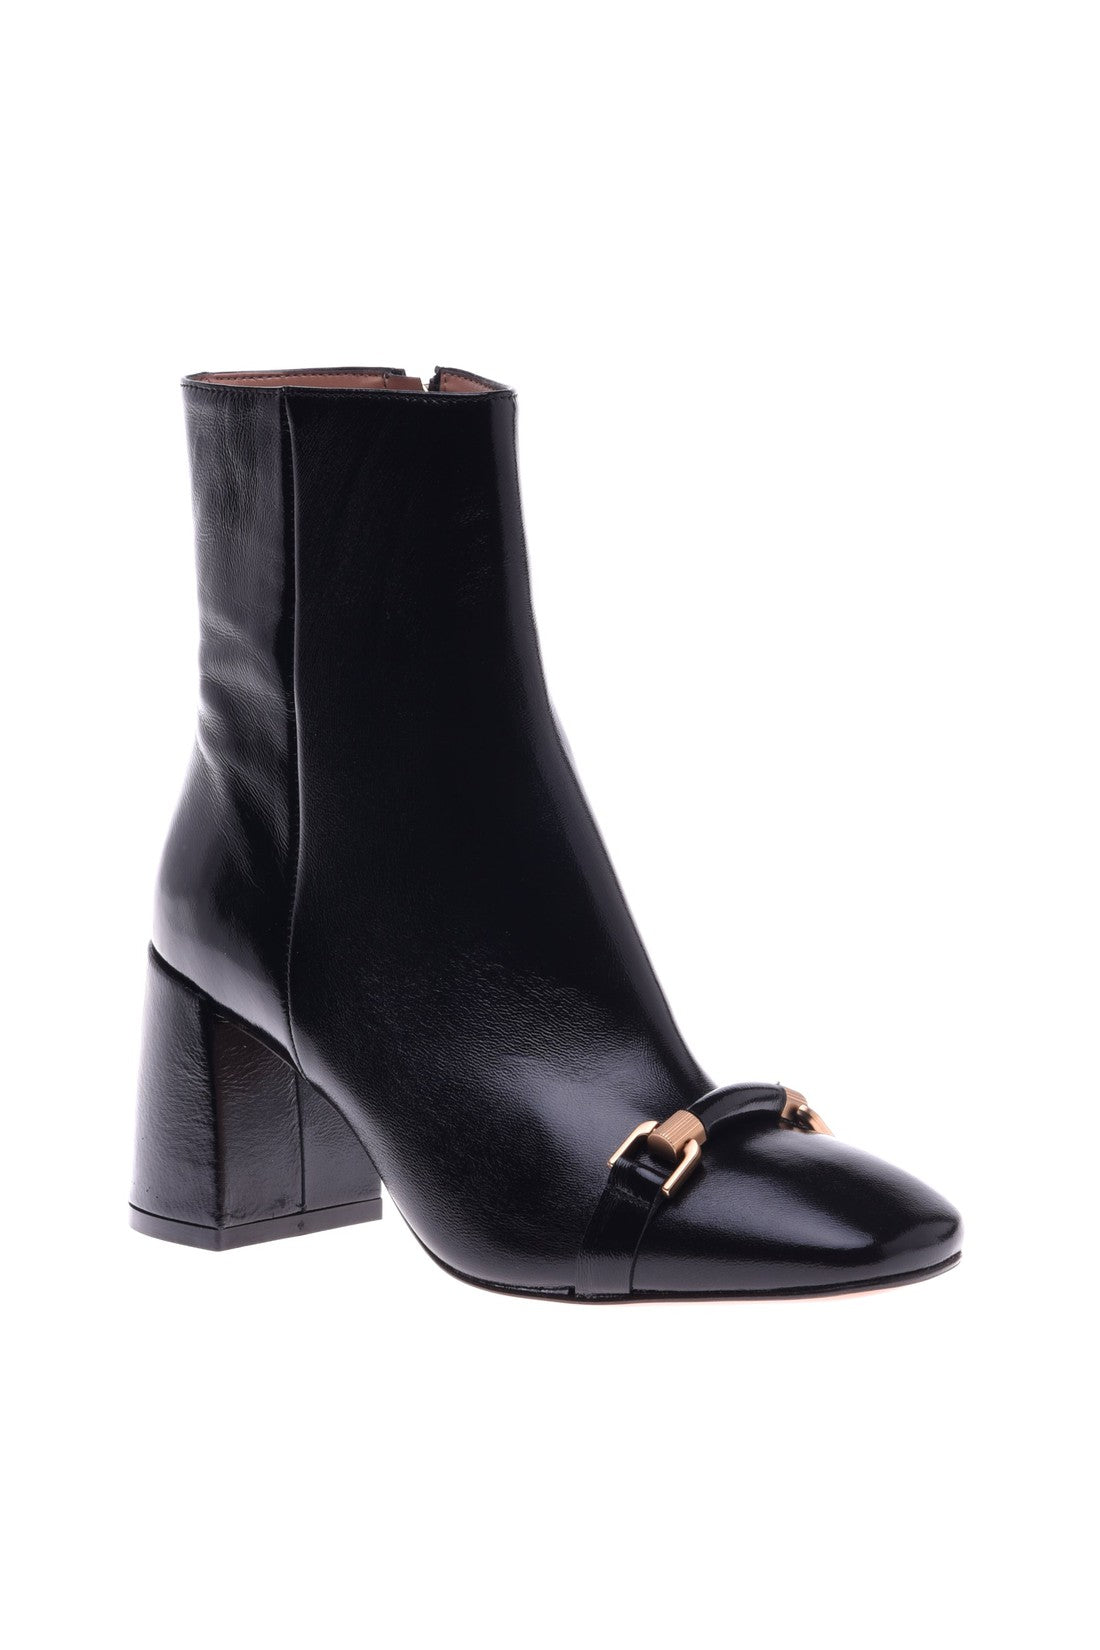 BALDININI-OUTLET-SALE-Ankle-boot-in-black-naplak-Stiefel-Stiefeletten-35-ARCHIVE-COLLECTION.jpg